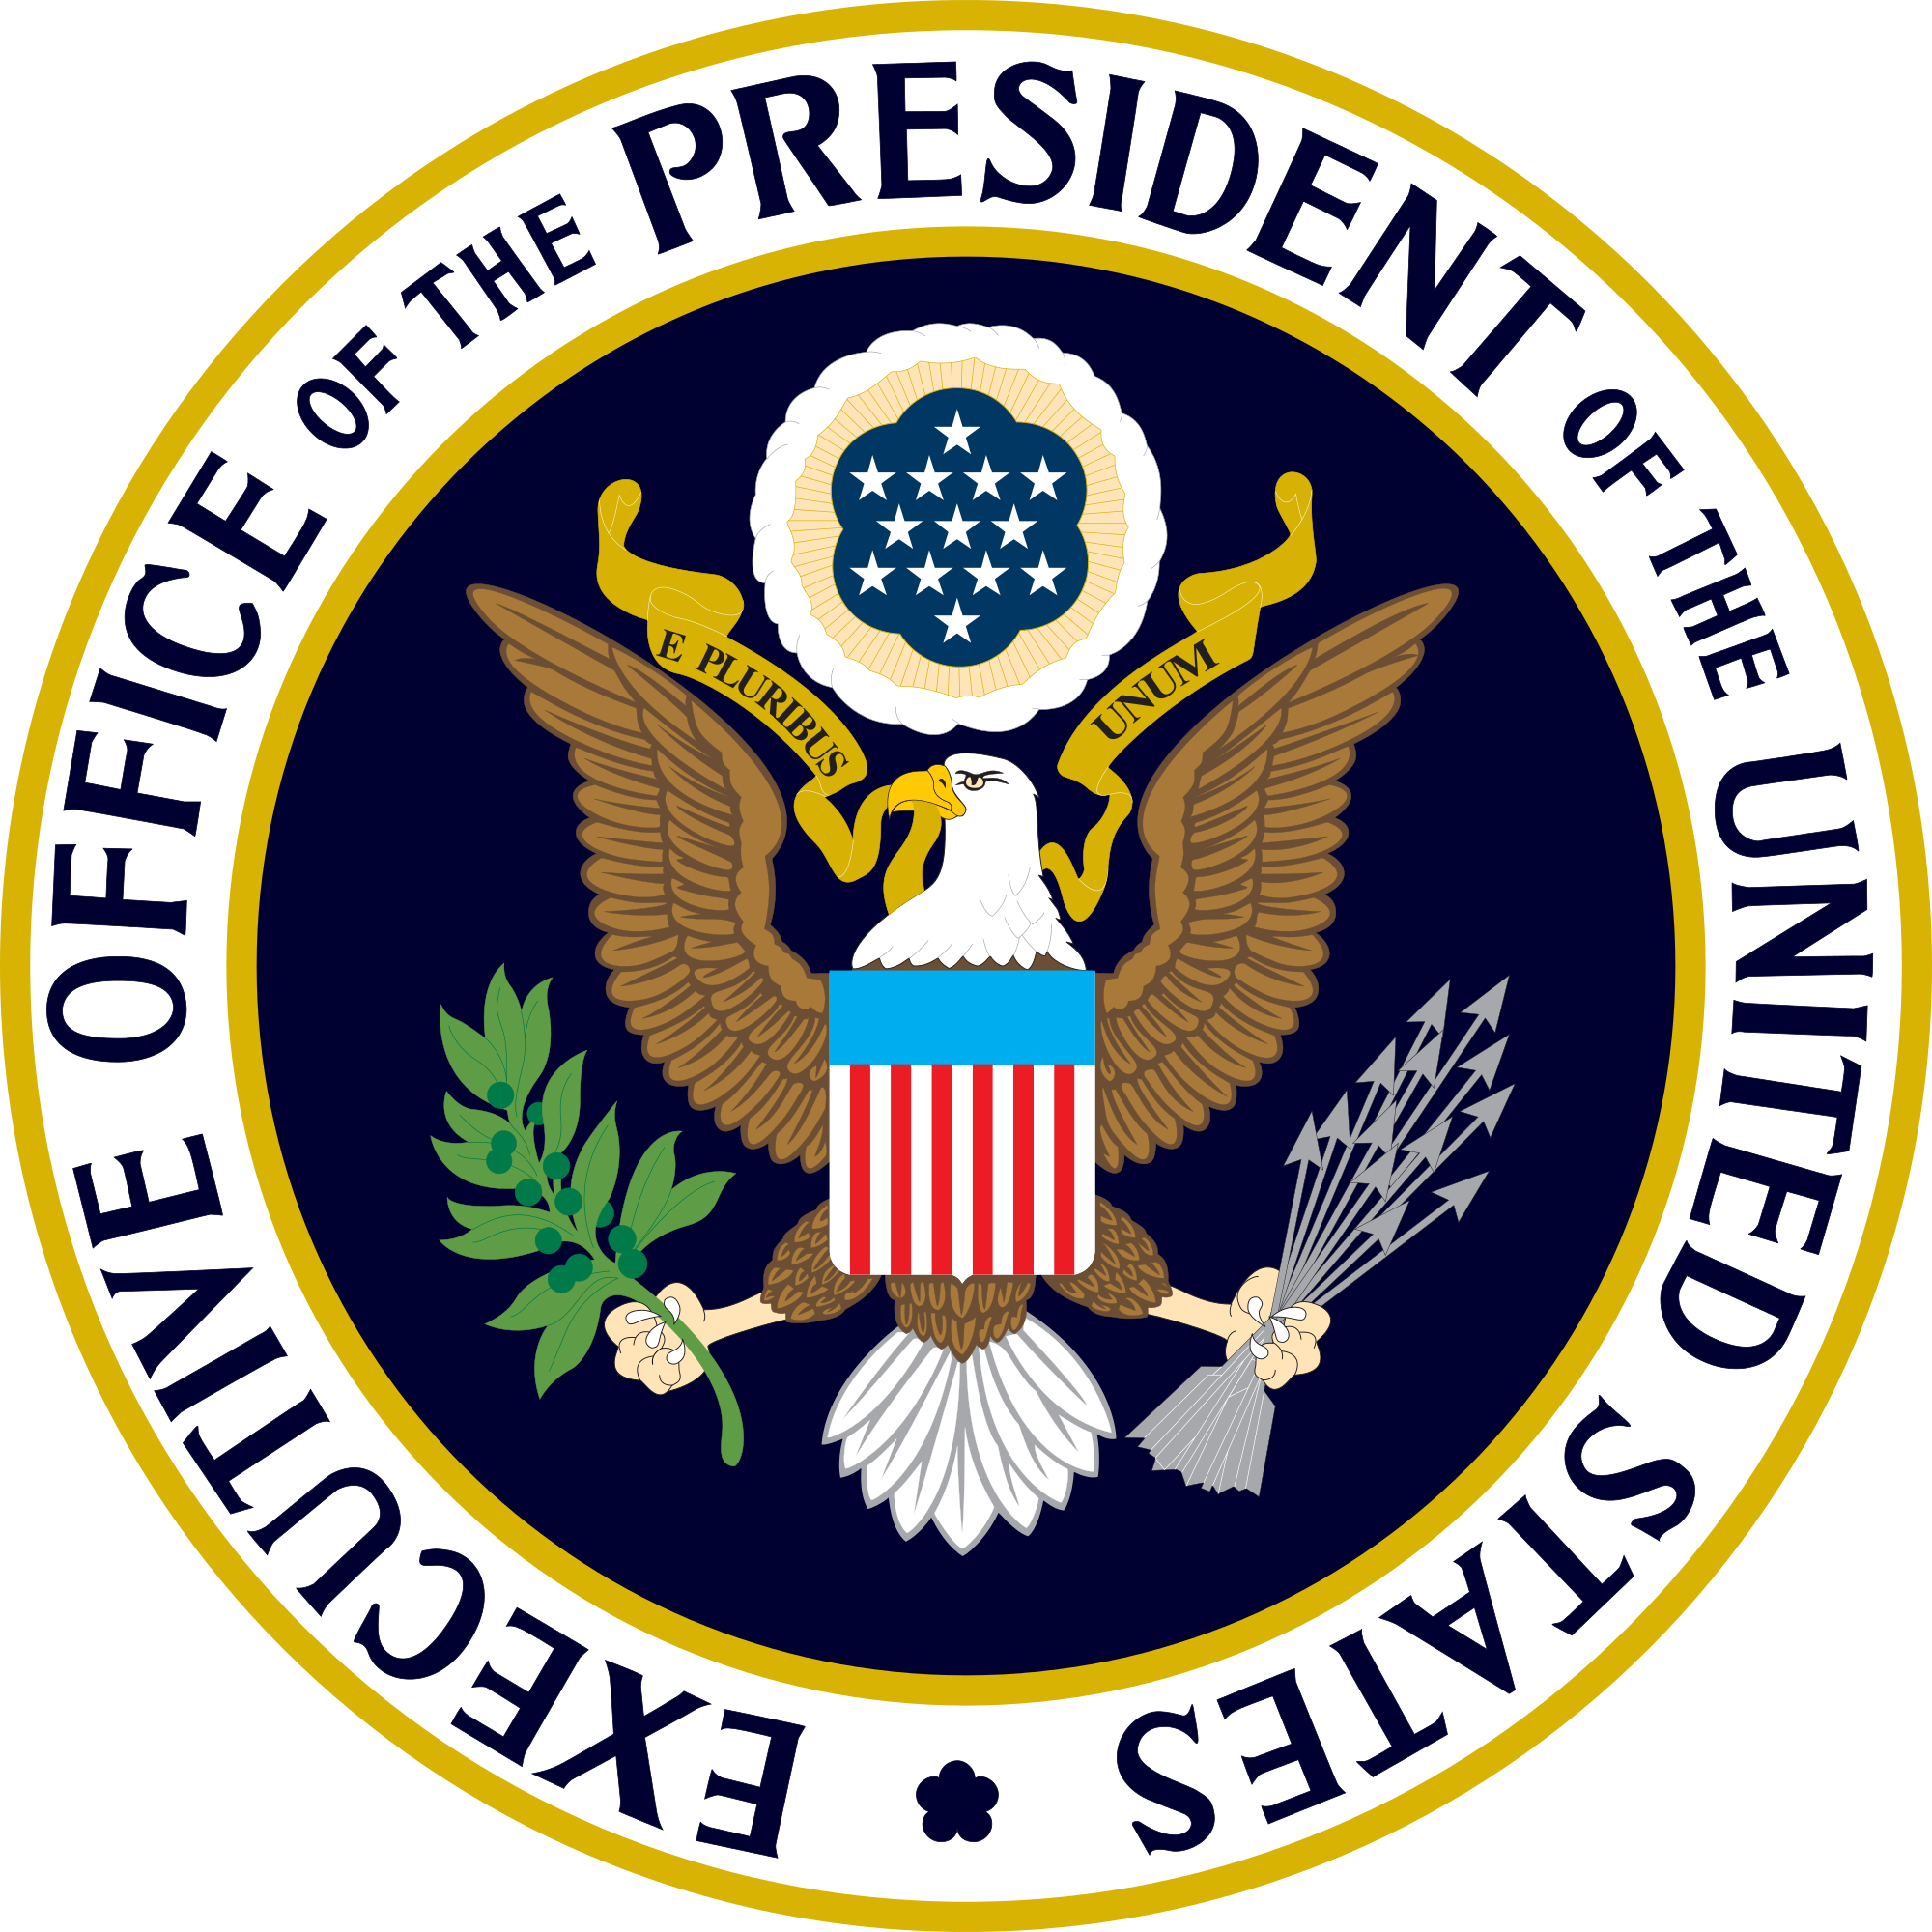 File seal of the. Government clipart executive branch